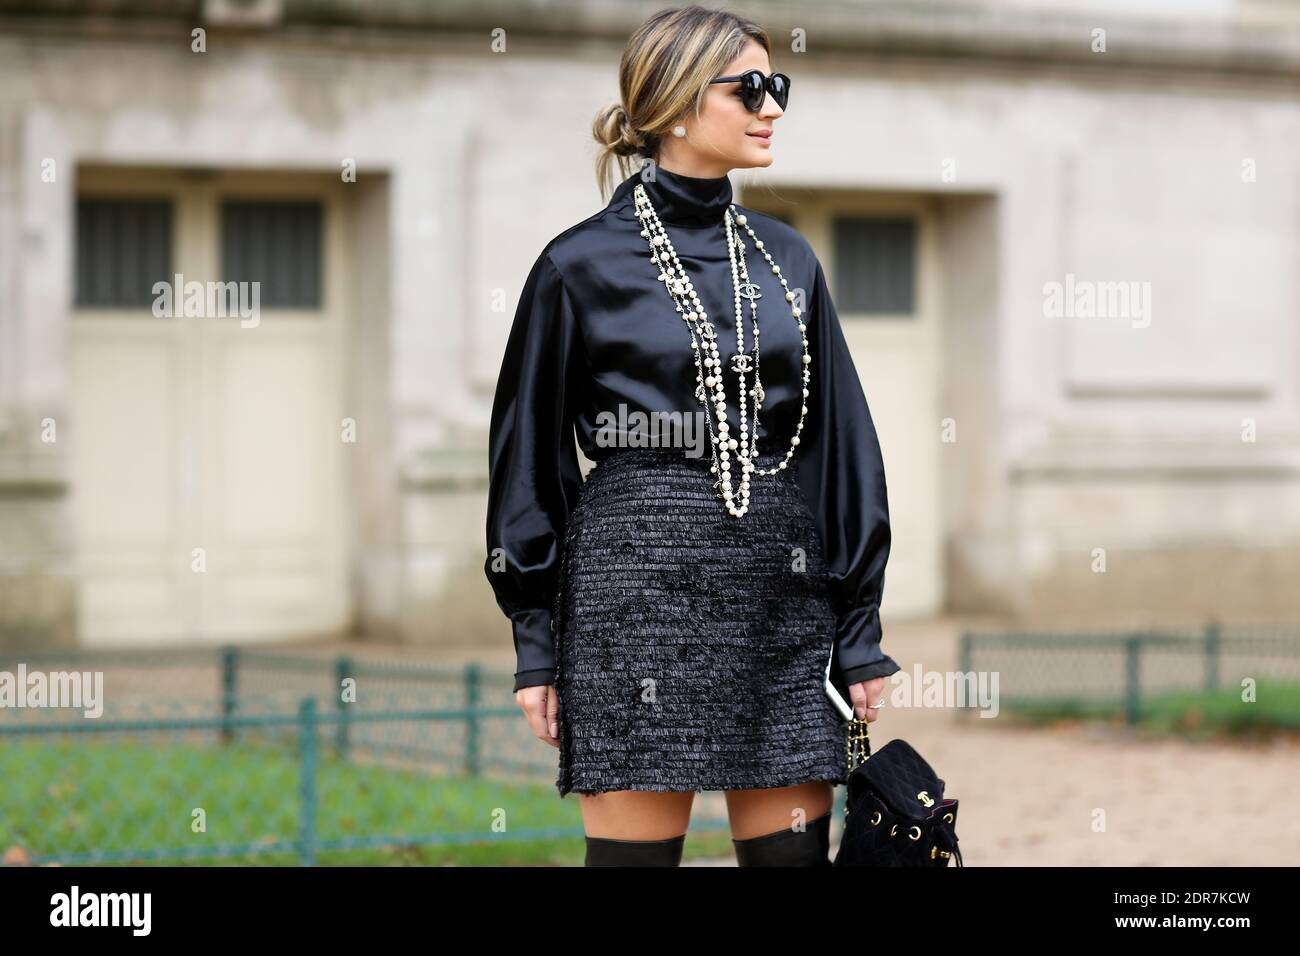 Fashion Blogger Thassia Naves wears a Chanel necklace, skirt and